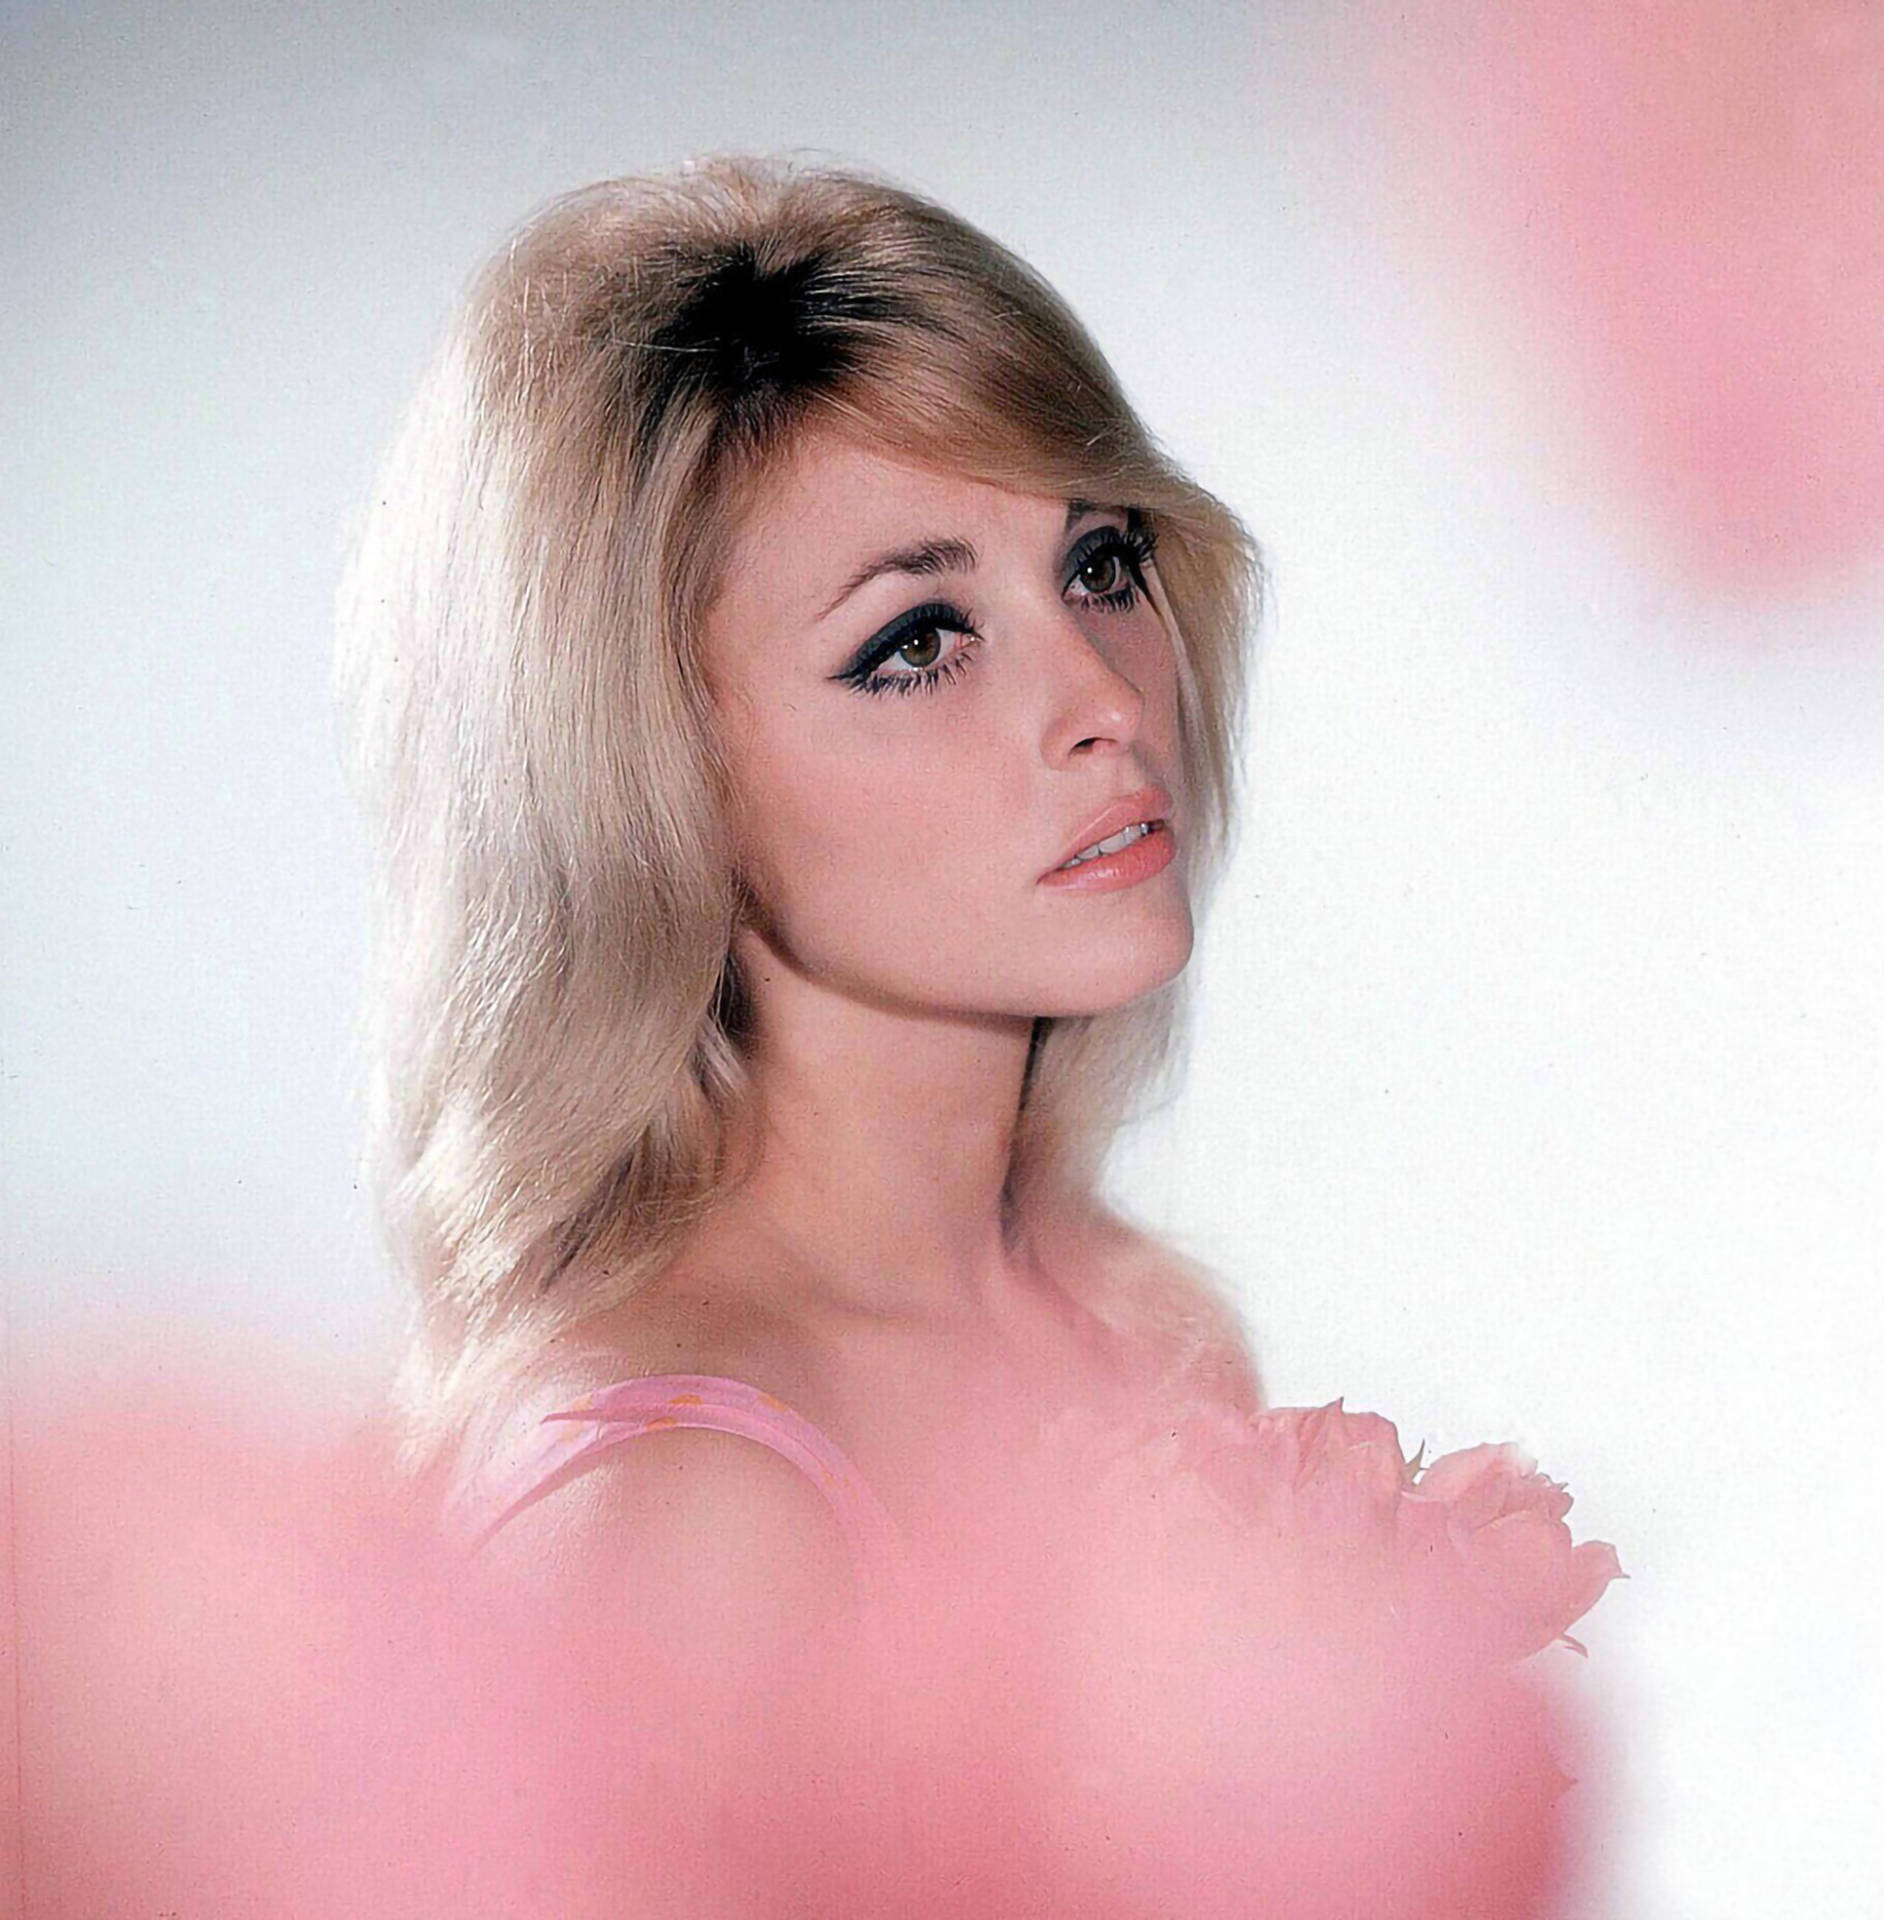 Sharontate Traumhaft In Pink Wallpaper